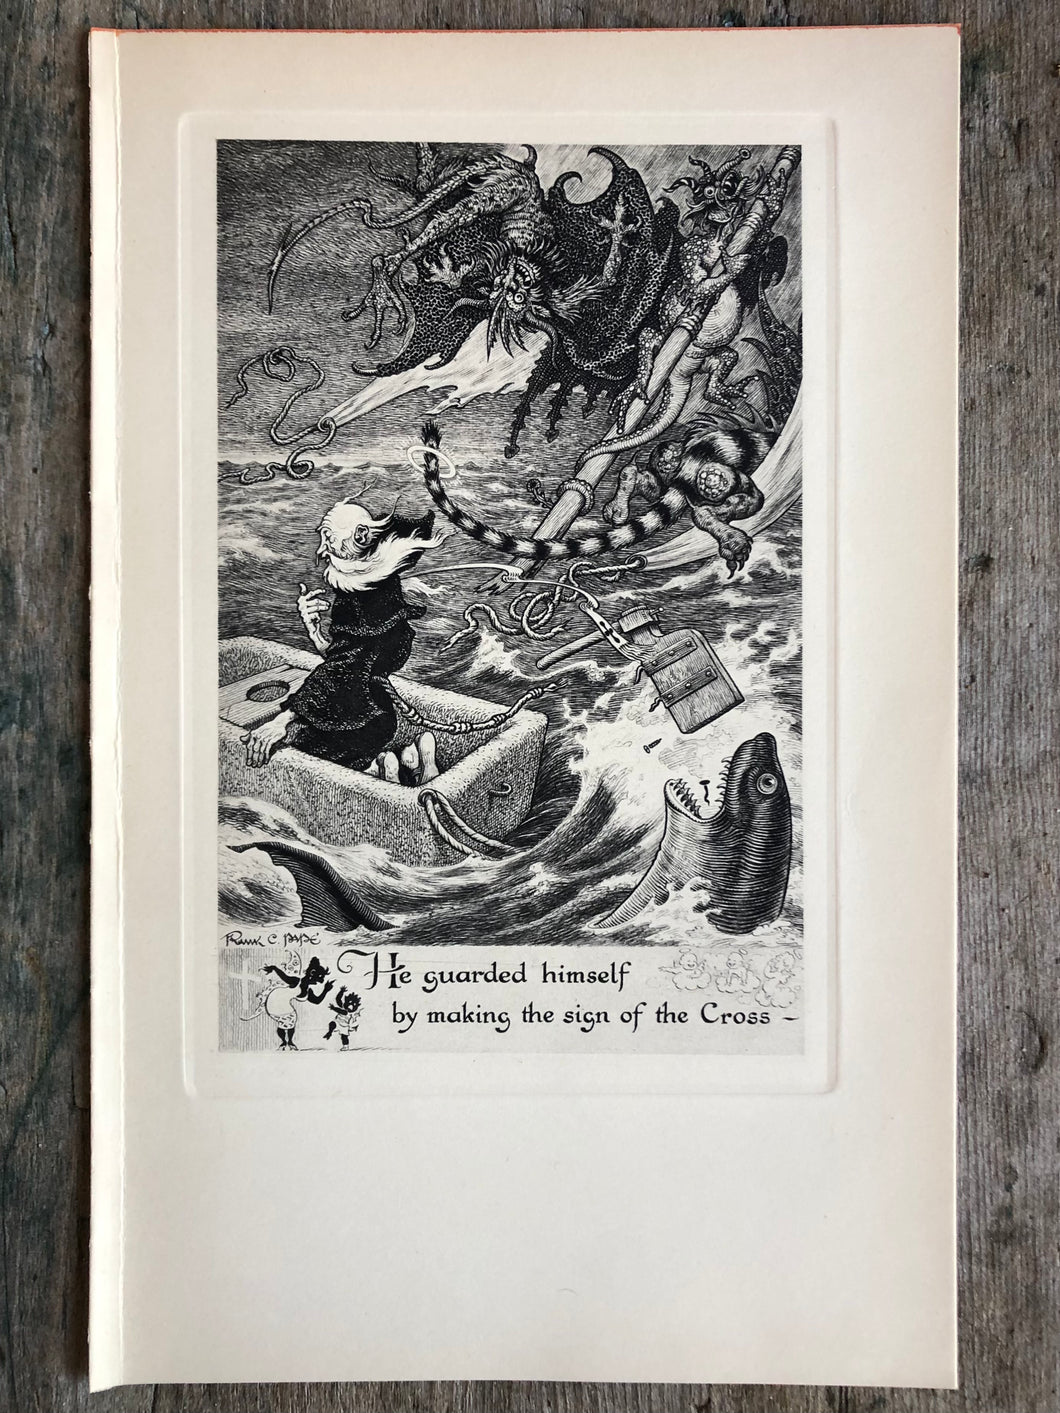 Print by Frank C. Pape from Penguin Island by Anatole France